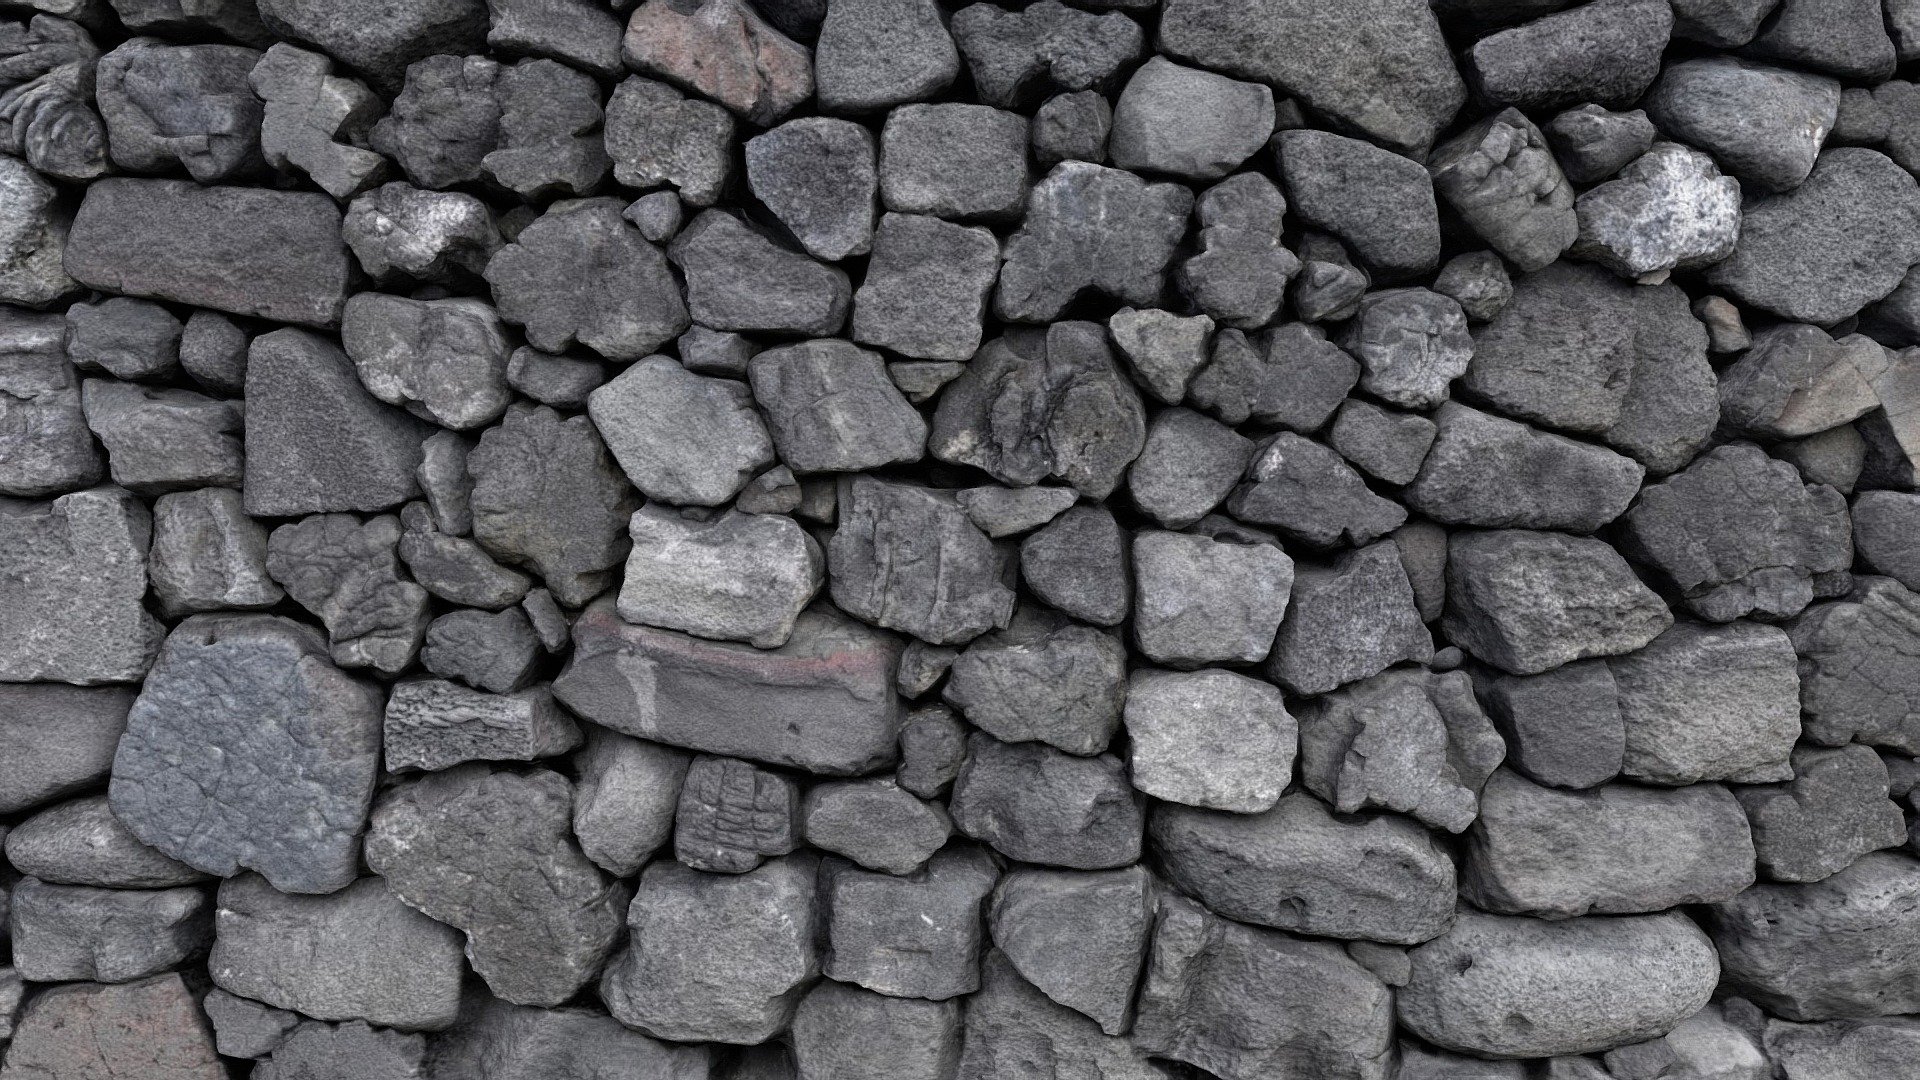 A 400-year-old wall constructed using uhau humu pohaku (dry-set masonry) with no mortar between rocks.
This is a wall section from the Great Wall located at Puʻuhonua o Hōnaunau on the Big Island 3d model